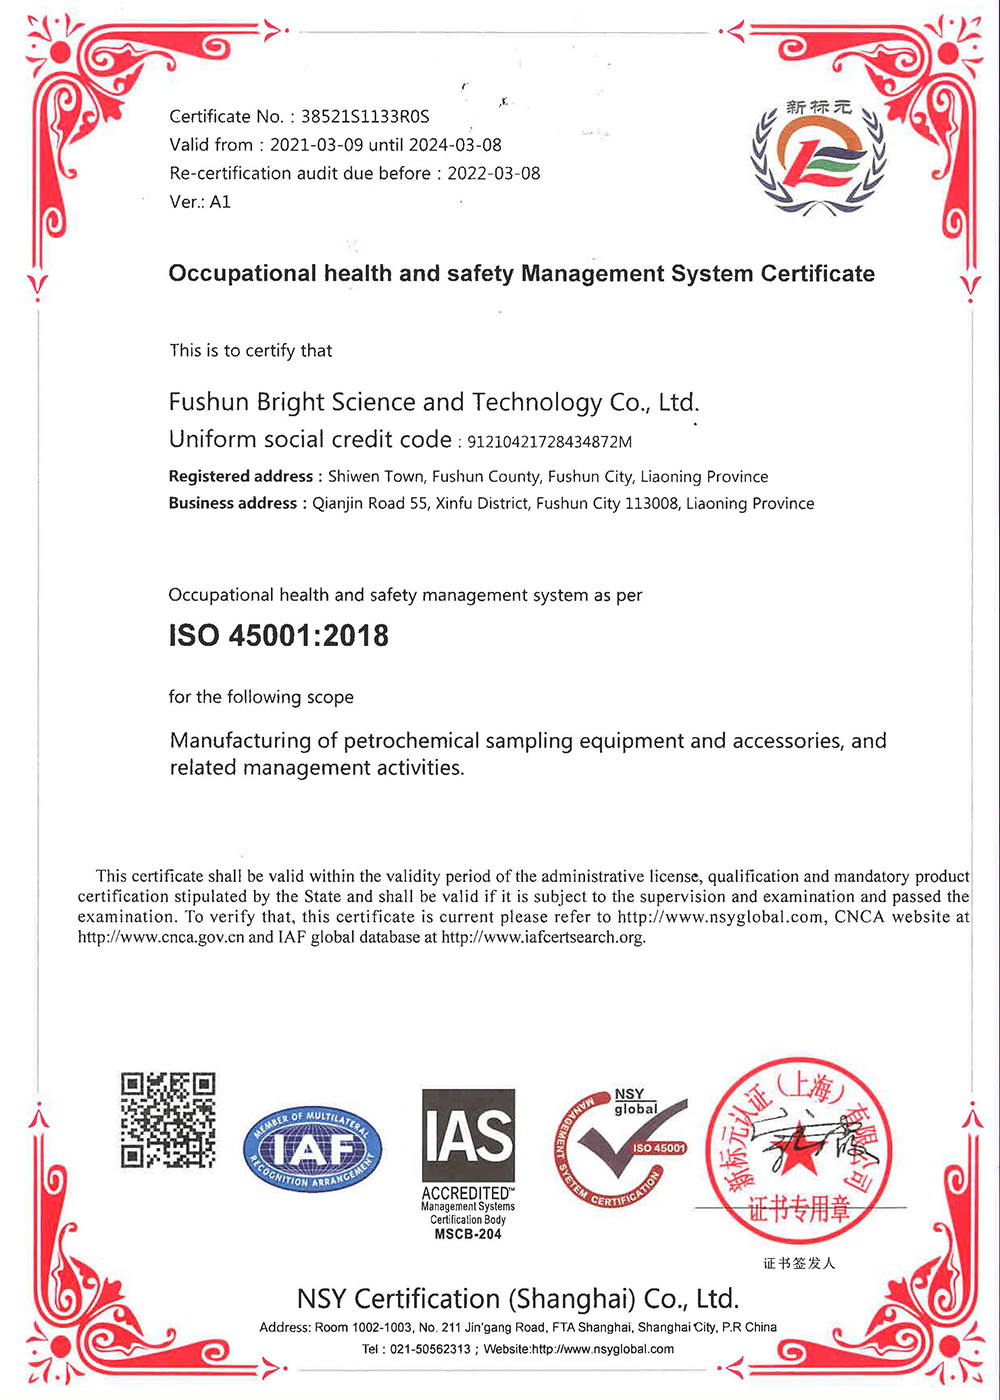 ISO 45001 Occupation Health Safety Management System And other International Certification